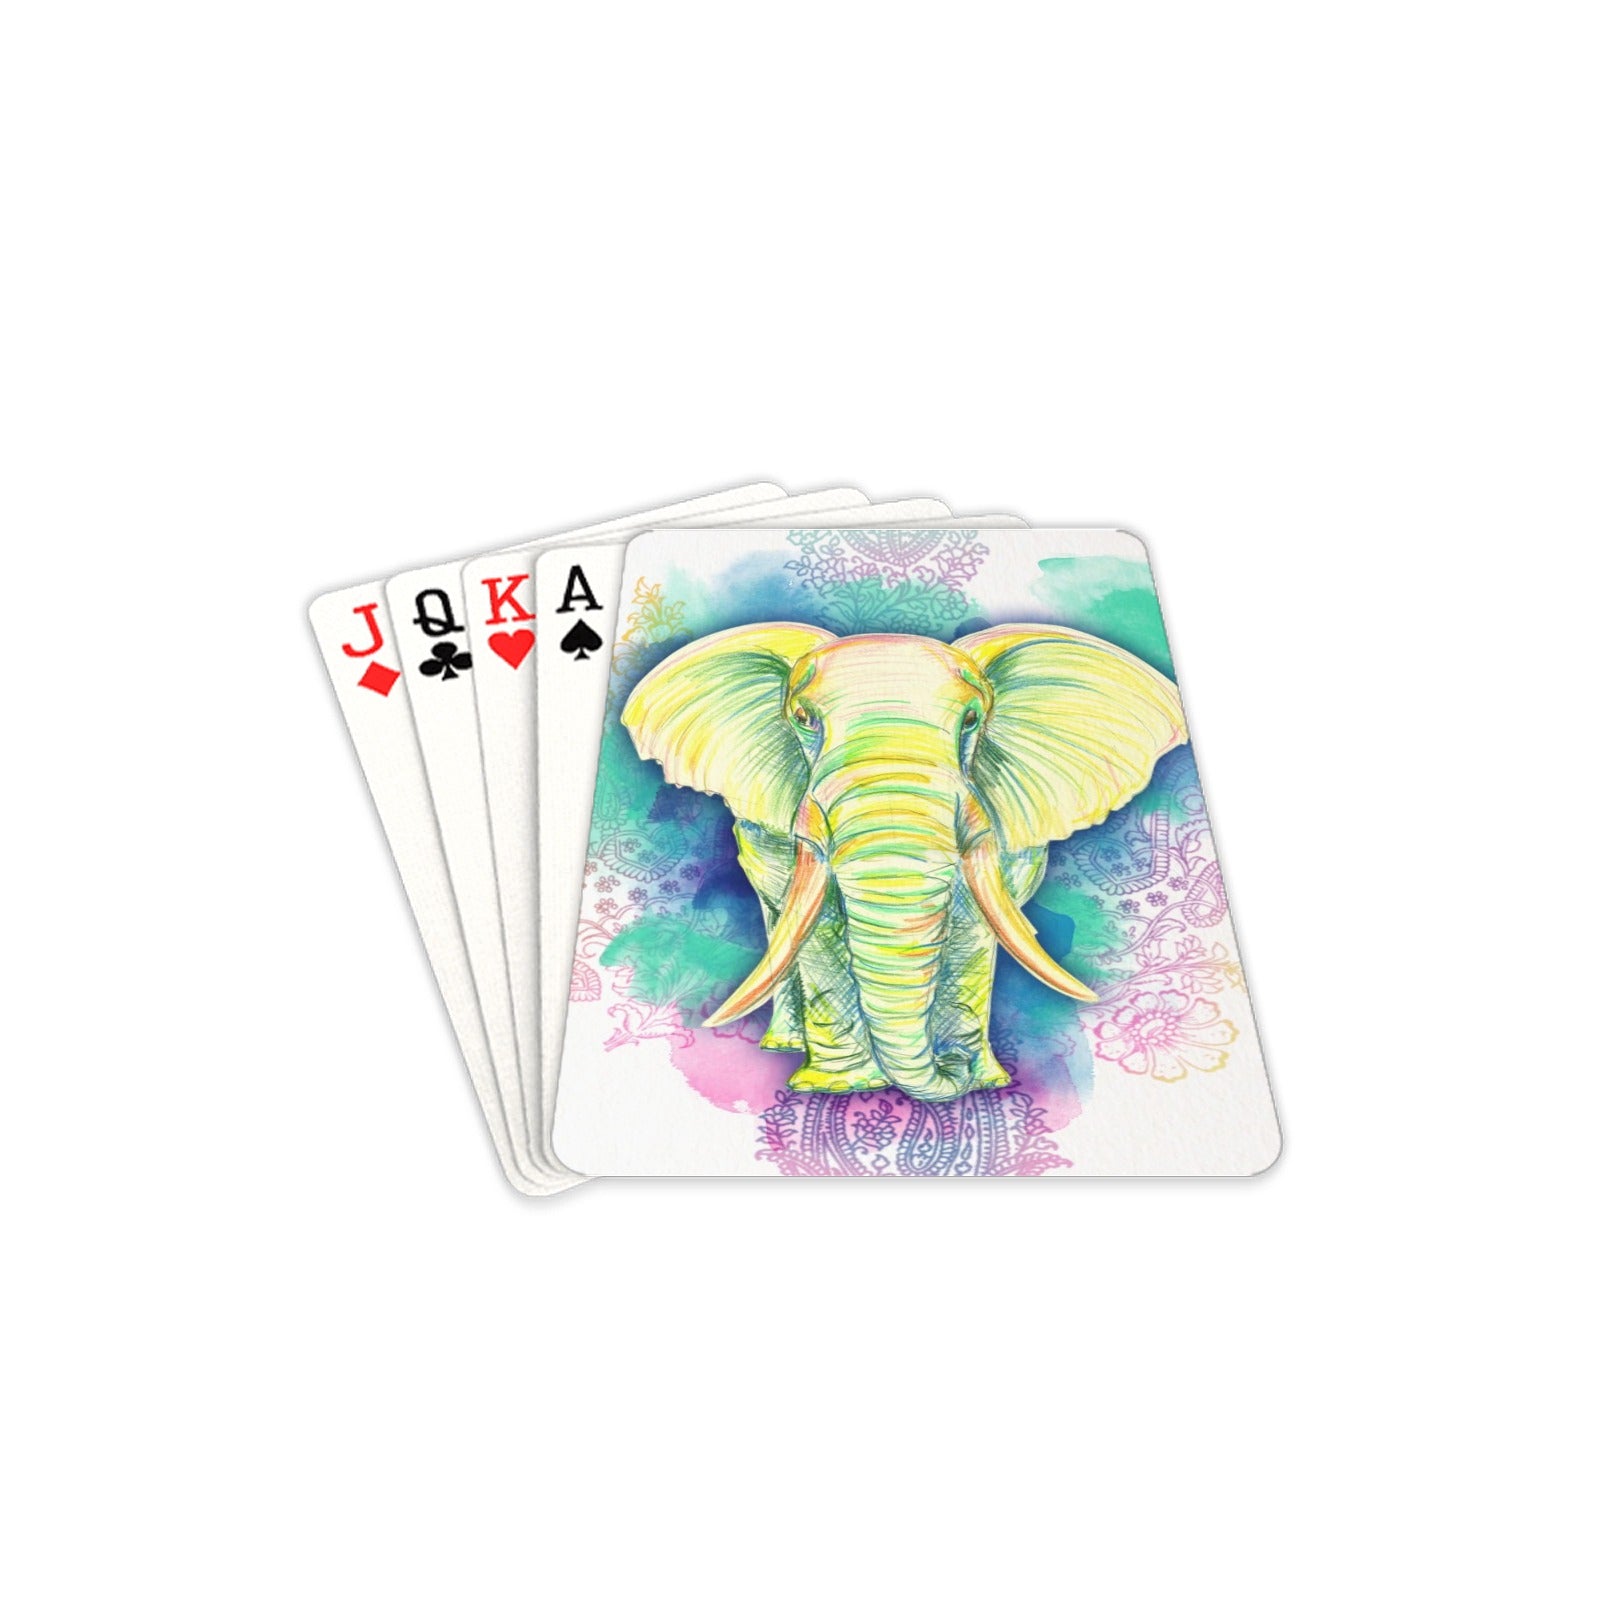 Elephant - Playing Cards 2.5"x3.5" Playing Card 2.5"x3.5"